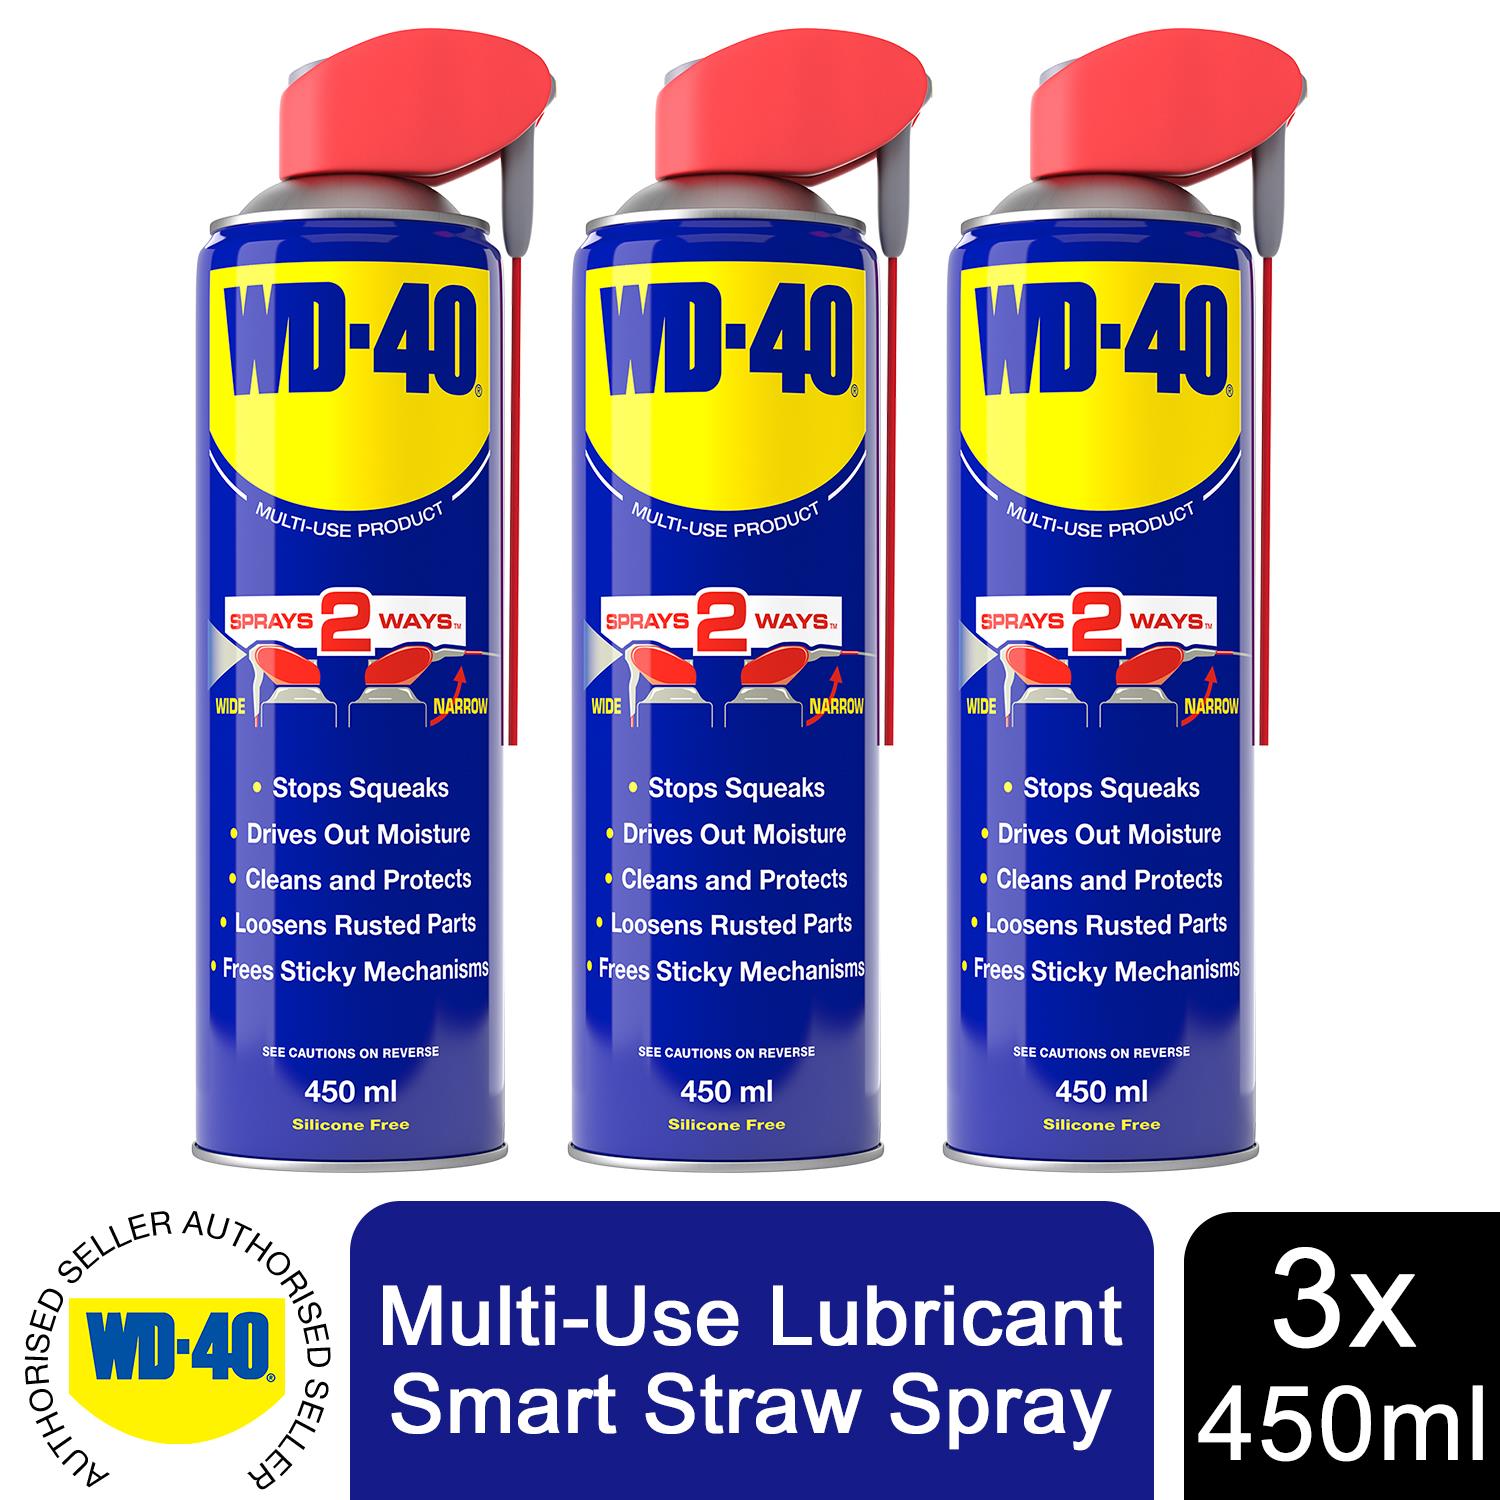 WD-40 Multi-Use Product - Multi-Purpose Lubricant with Smart Straw